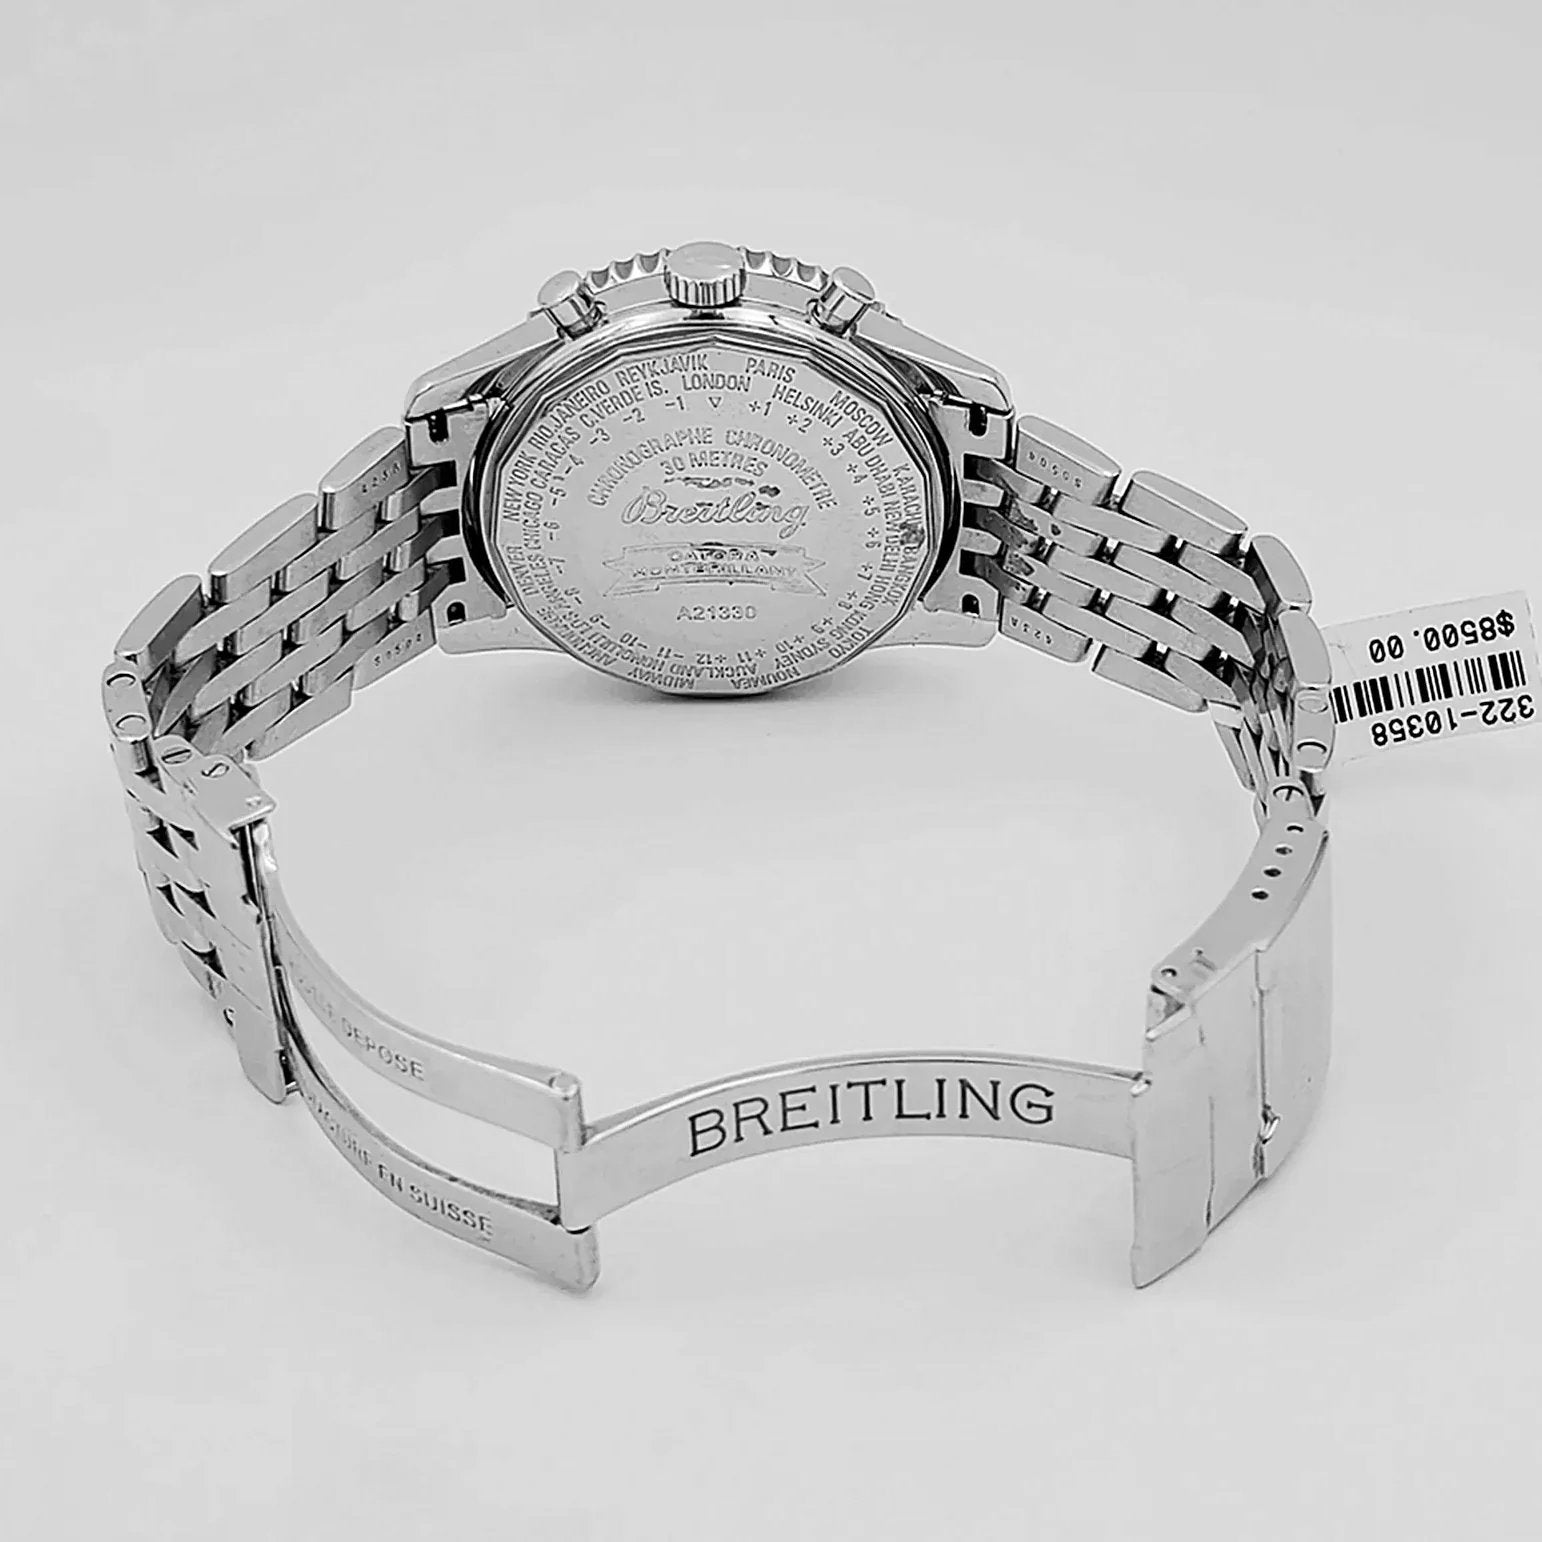 Men's Breitling A21330 Montbrillant 42mm Chronograph Stainless Steel Watch with White Dial. (Pre-Owned)